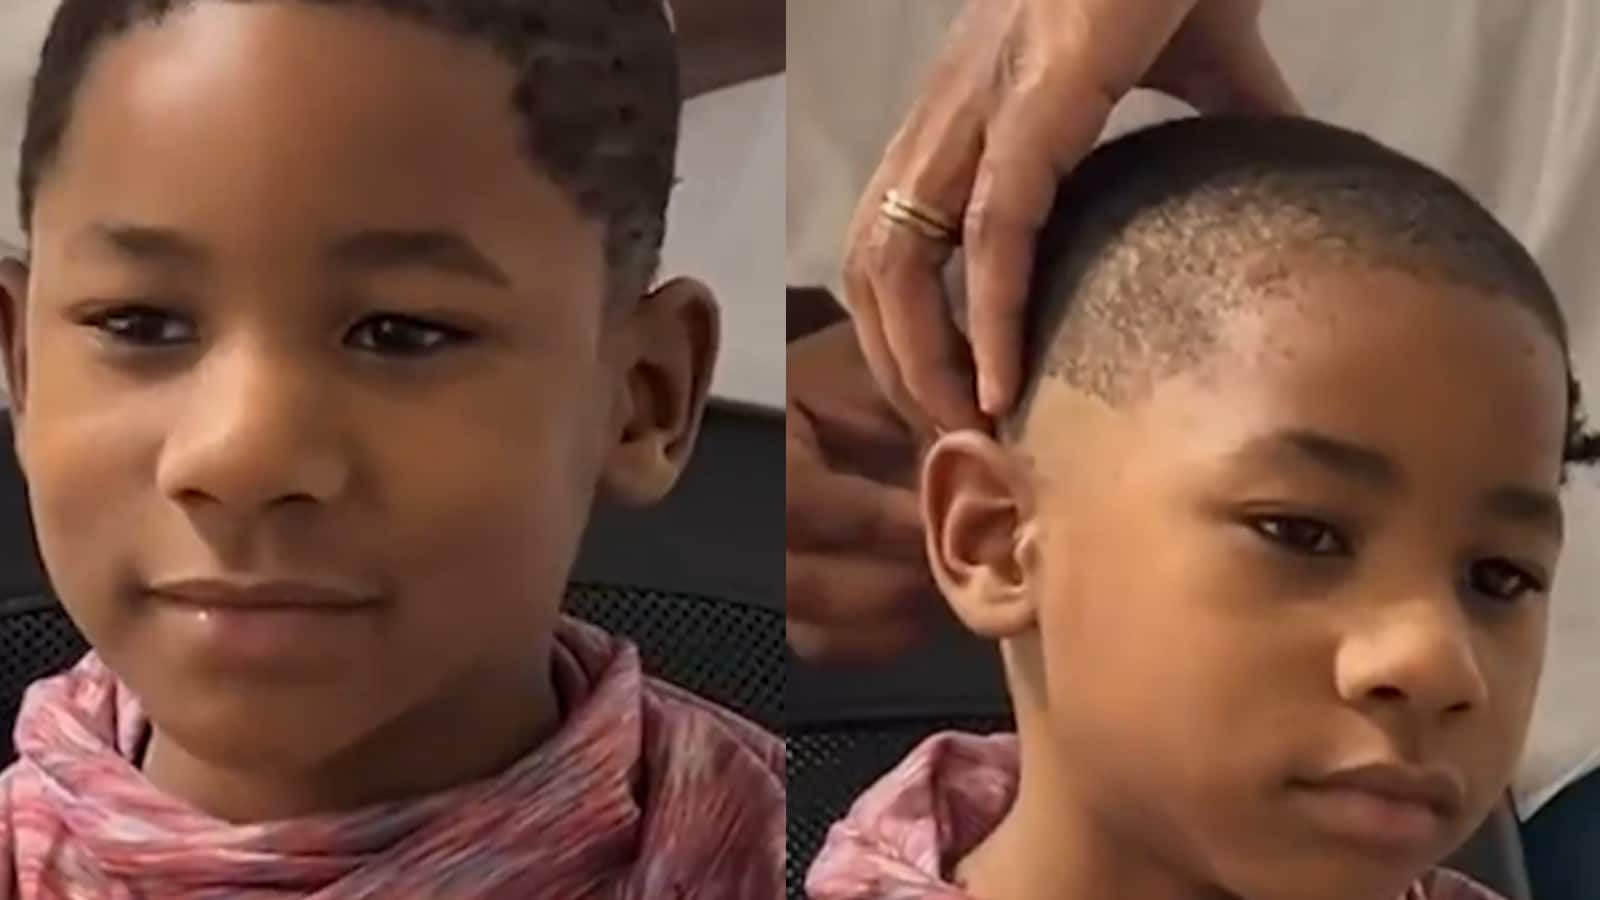 Watch: This 'Resourceful Dad' is Using Just a Spoon to Give His Son a Neat  Haircut